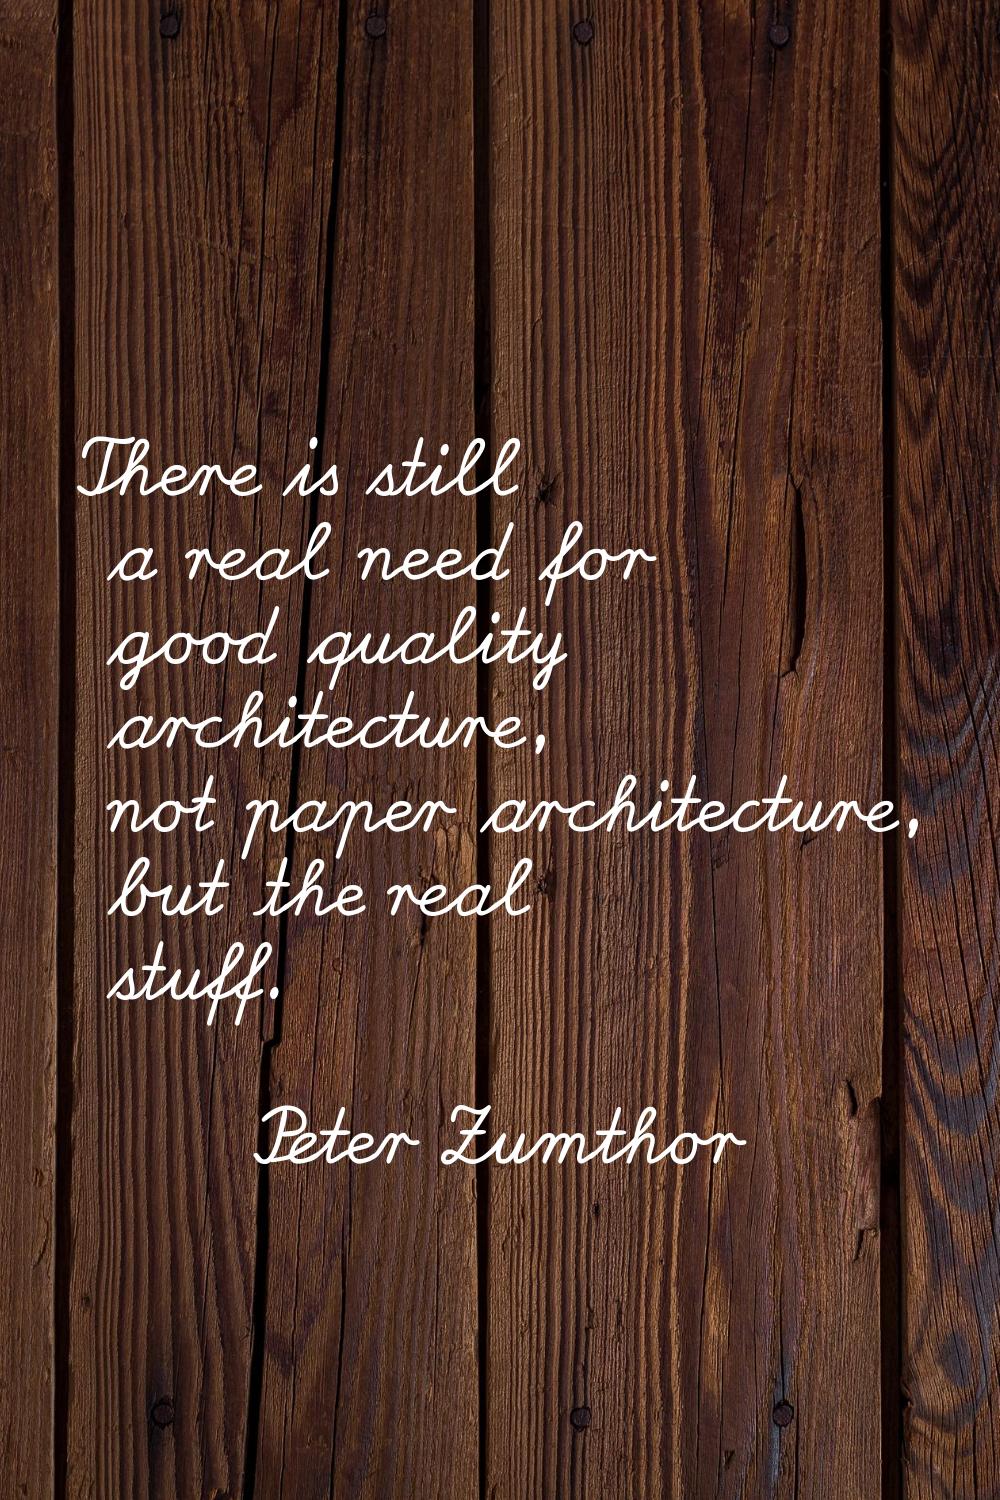 There is still a real need for good quality architecture, not paper architecture, but the real stuf